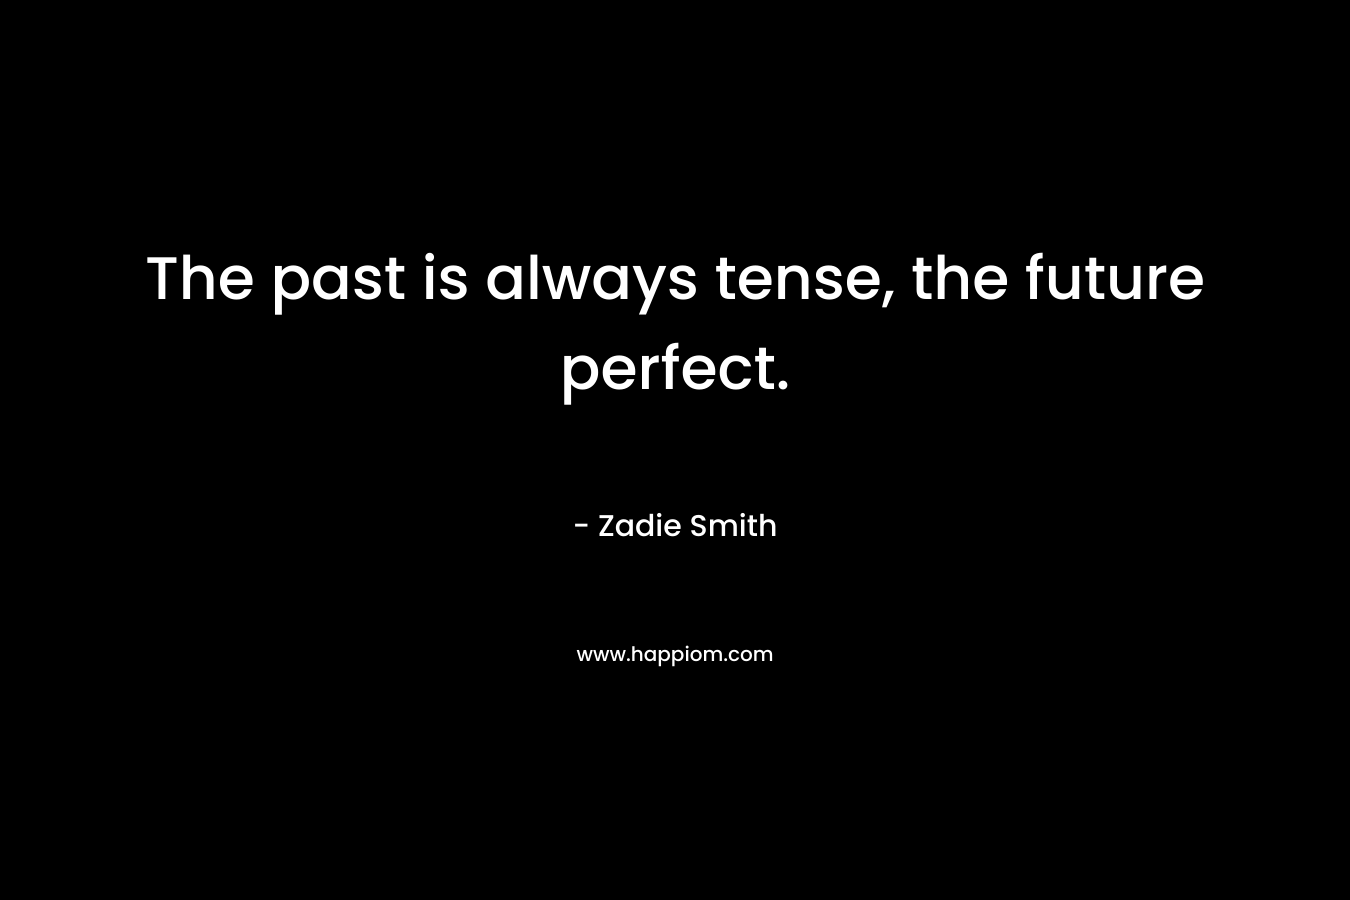 The past is always tense, the future perfect. – Zadie Smith